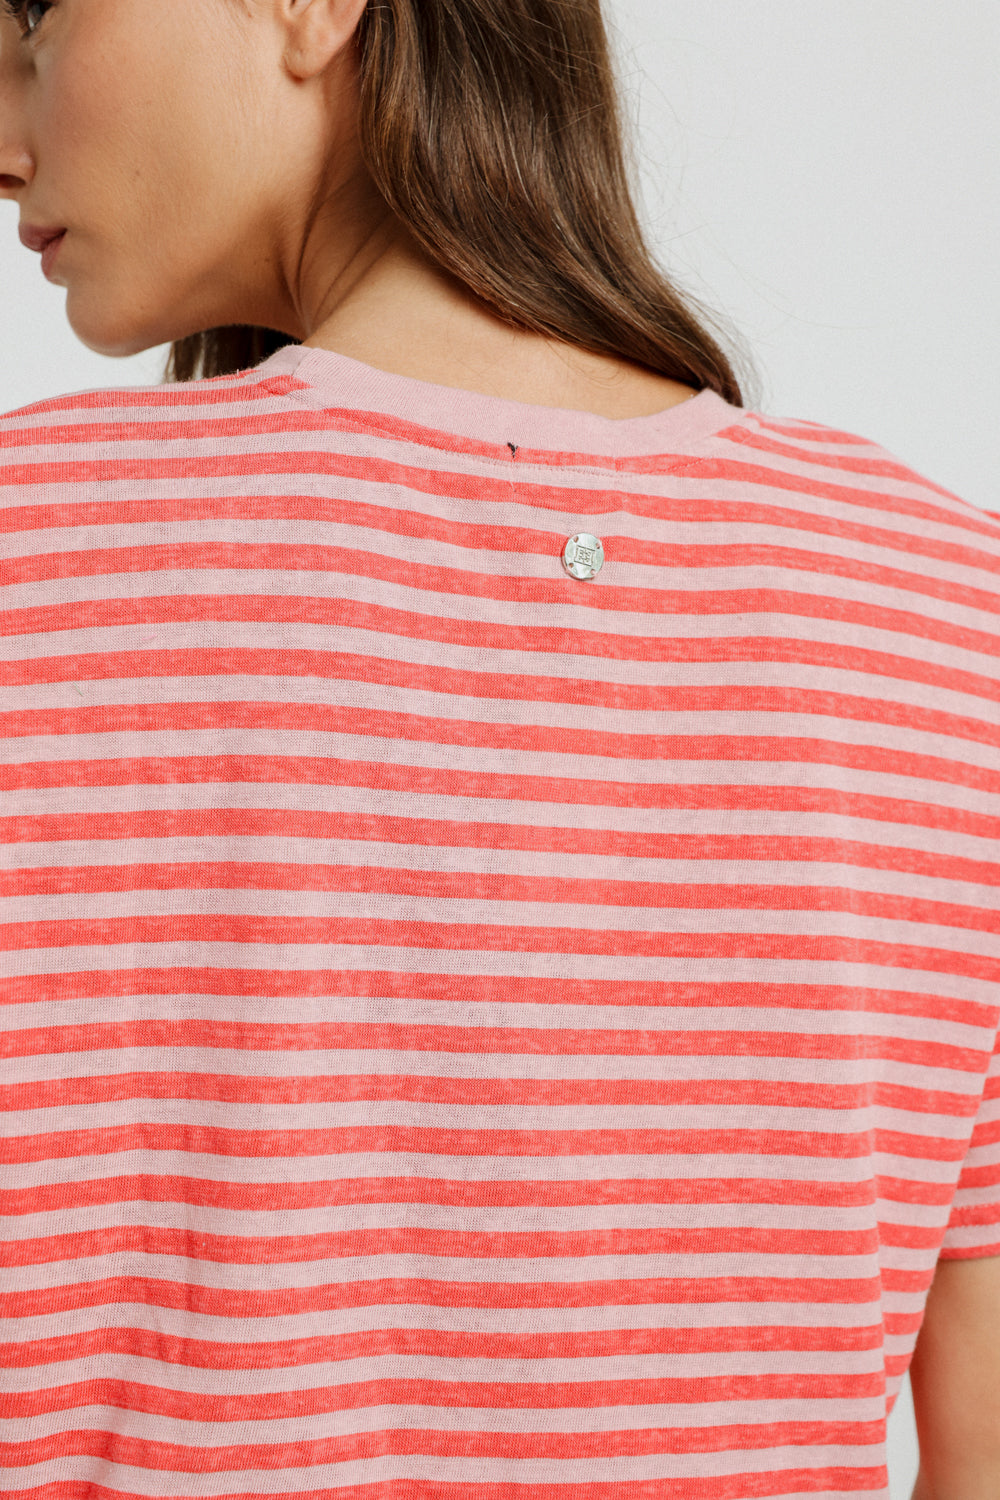 Pioneer Red Stripes T-Shirt